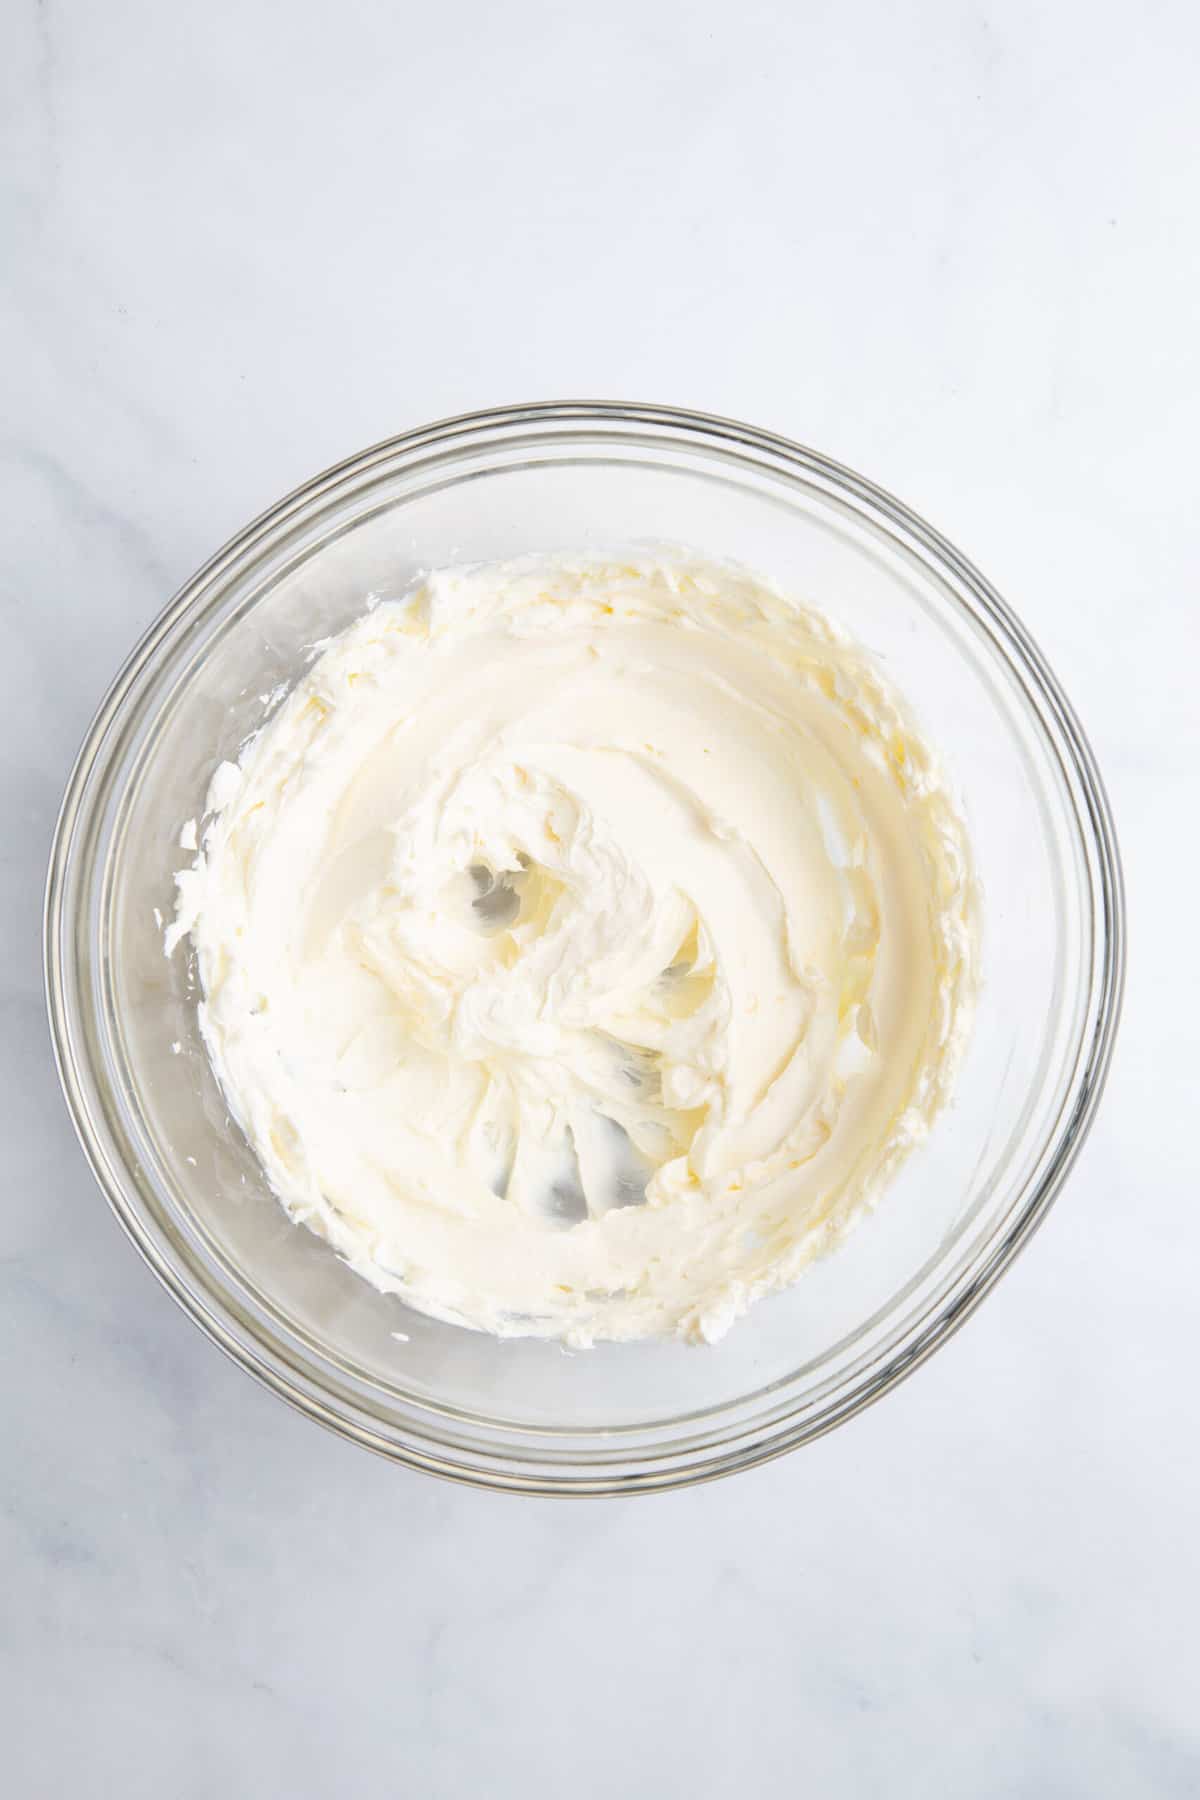 large glass bowl of cream cheese whisked until light and fluffy